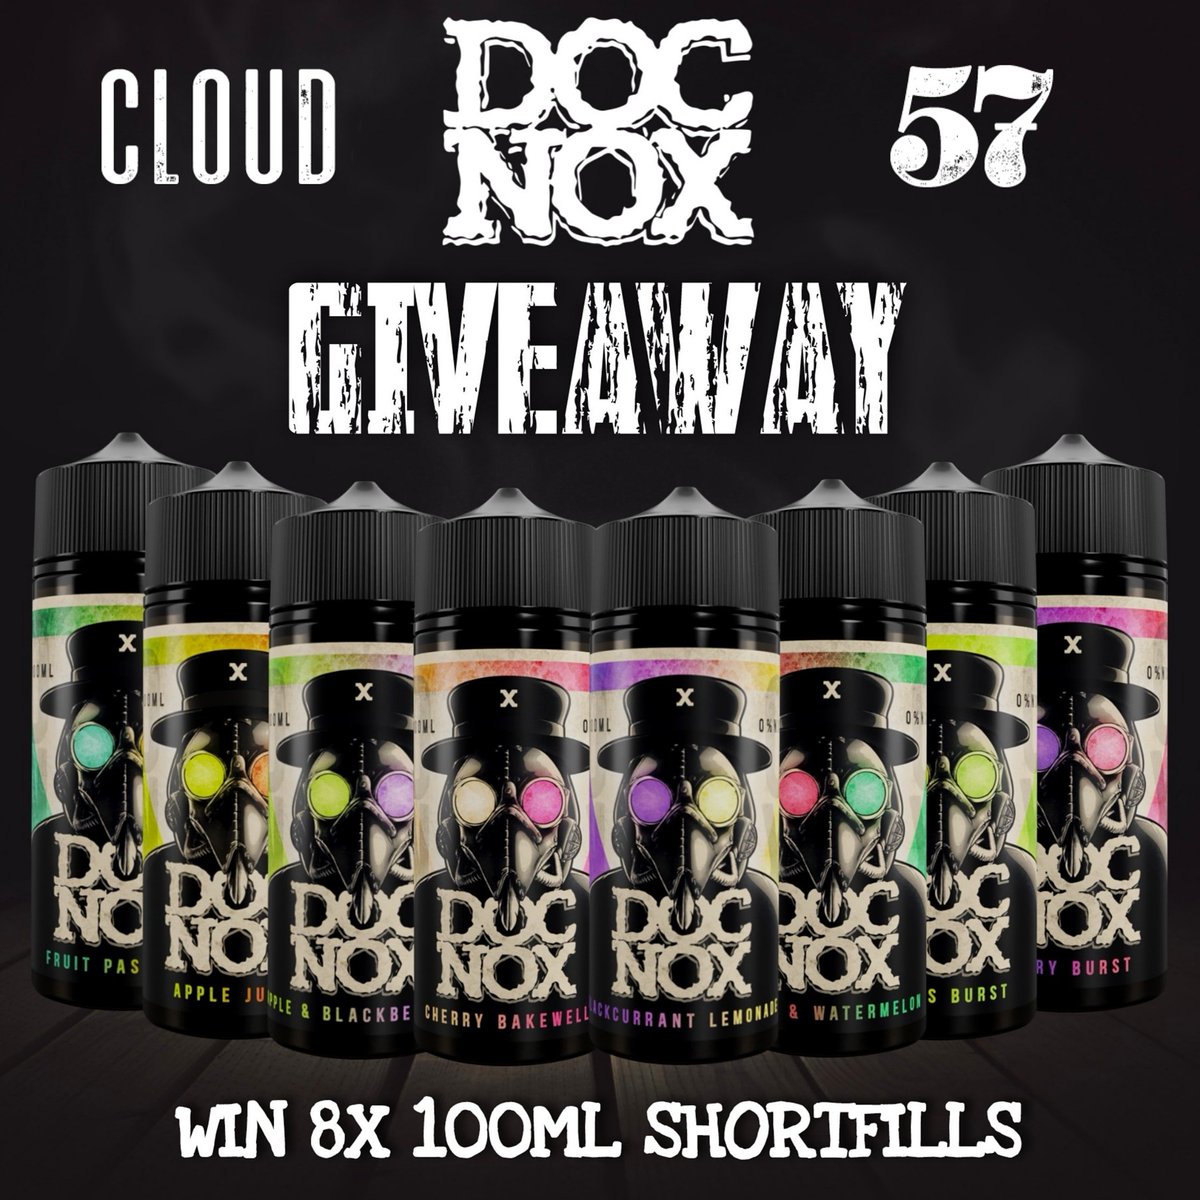 GIVEAWAY TIME!!!

WIN 800ML OF DOC NOX!!

Enter Here - @Cloud57V

Worldwide Giveaway!!
(Excludes US & Canada)

#cloud57 #docnox

#giveaway #biggiveaway #vapegiveaway
#eliquidgiveaway #eugiveaway #ukgiveaway #worldwidegiveaway #giveaways #competition #freevape #wineliquid